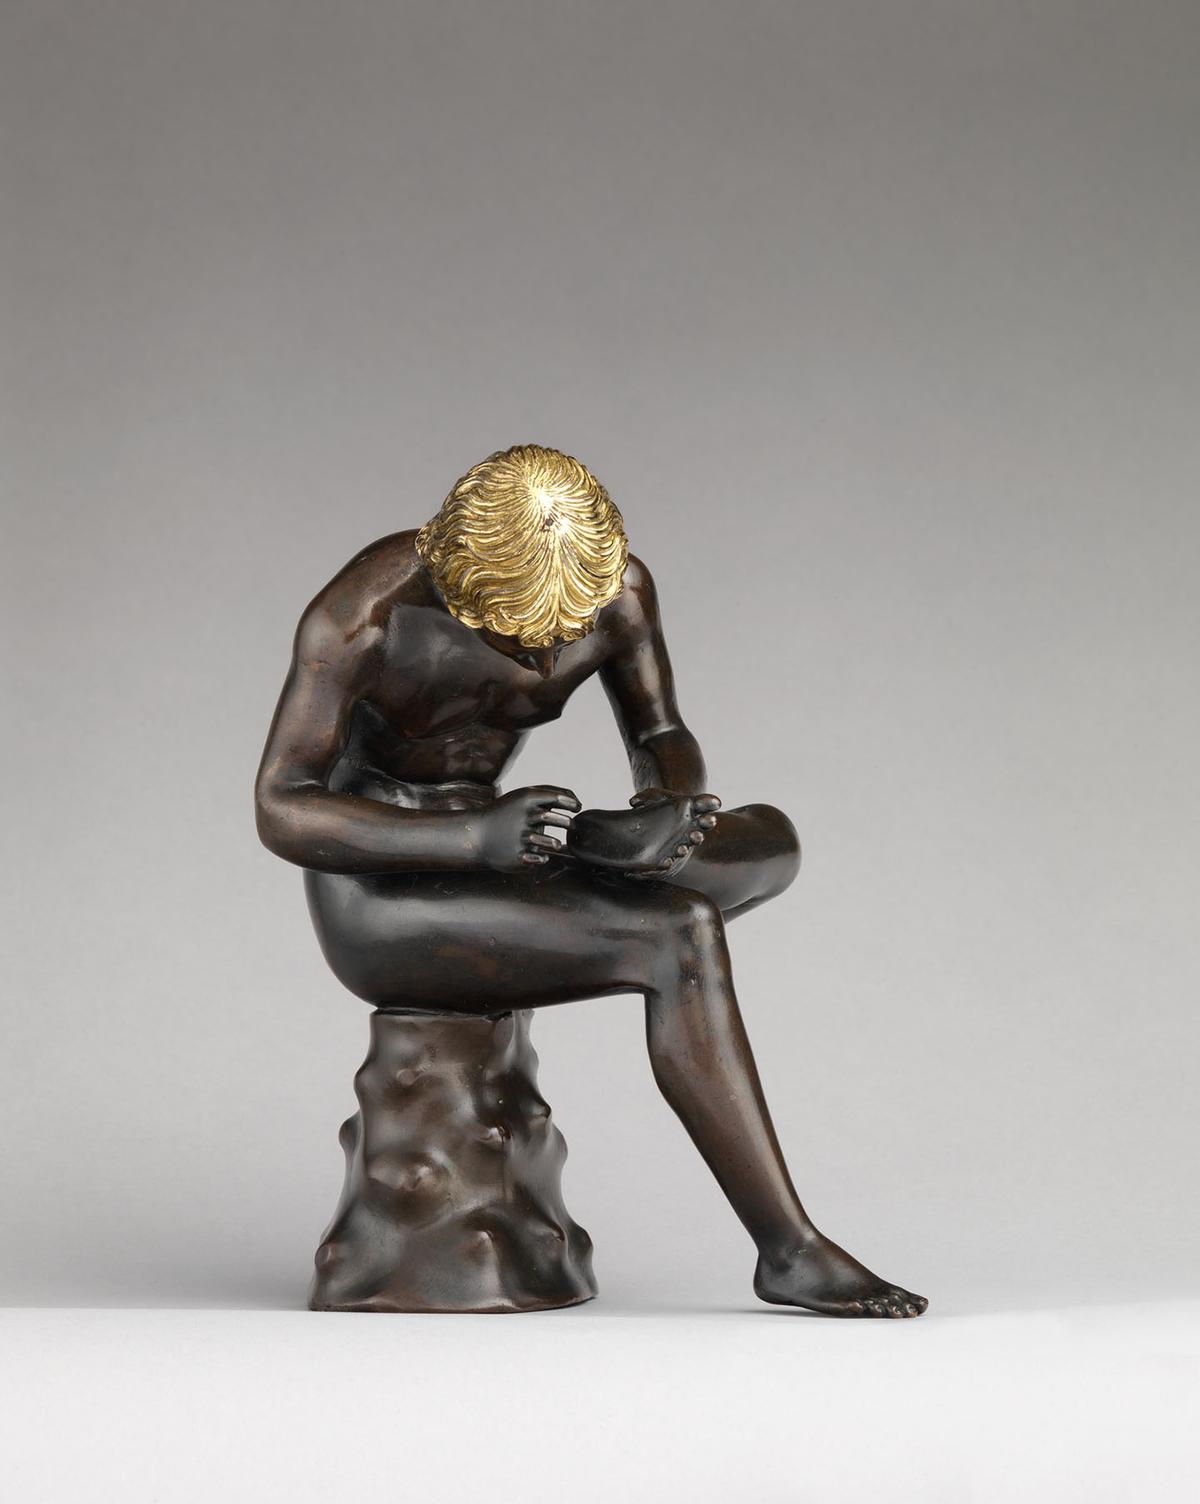 Another angle of "Spinario" ("Boy Pulling a Thorn From His Foot"). The Metropolitan Museum of Art, New York City. (Public Domain)